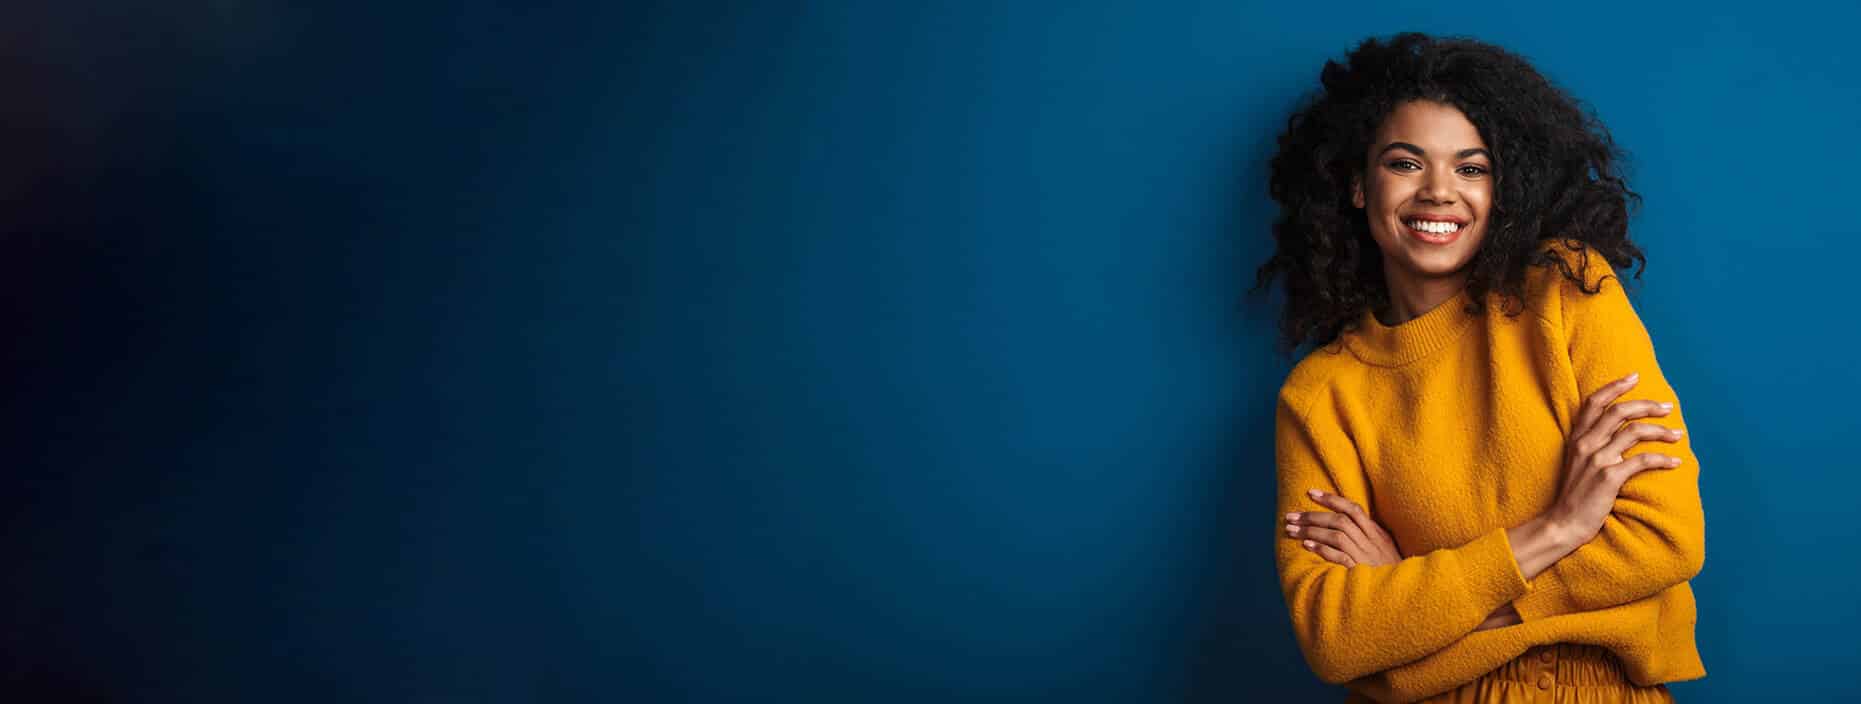 Young woman with curly hair posing against a blue background.